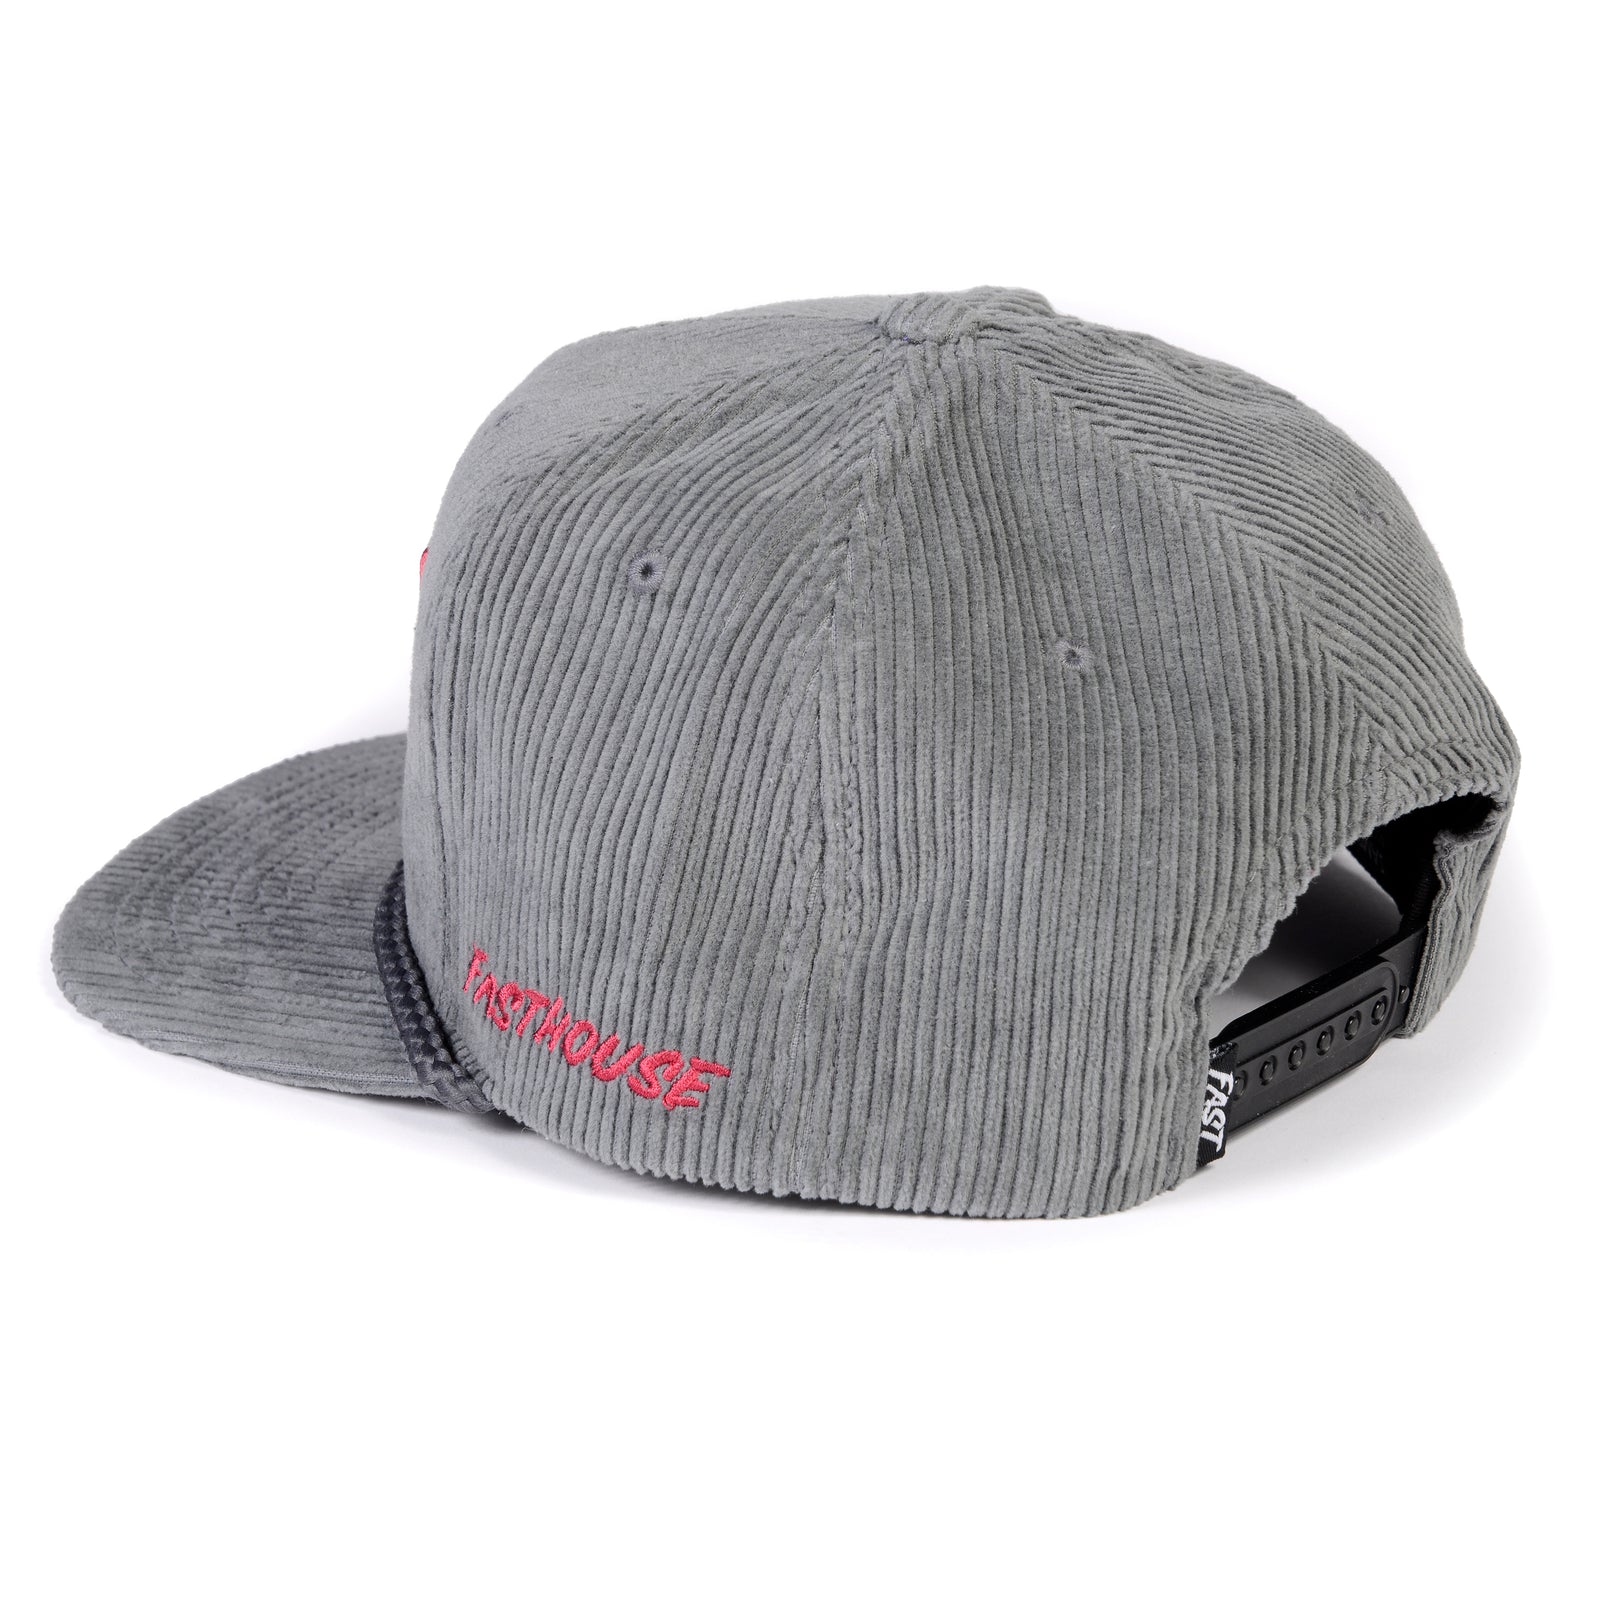 Fasthouse Haste Hat - Blue Jean - 2022 - Cambria Bike